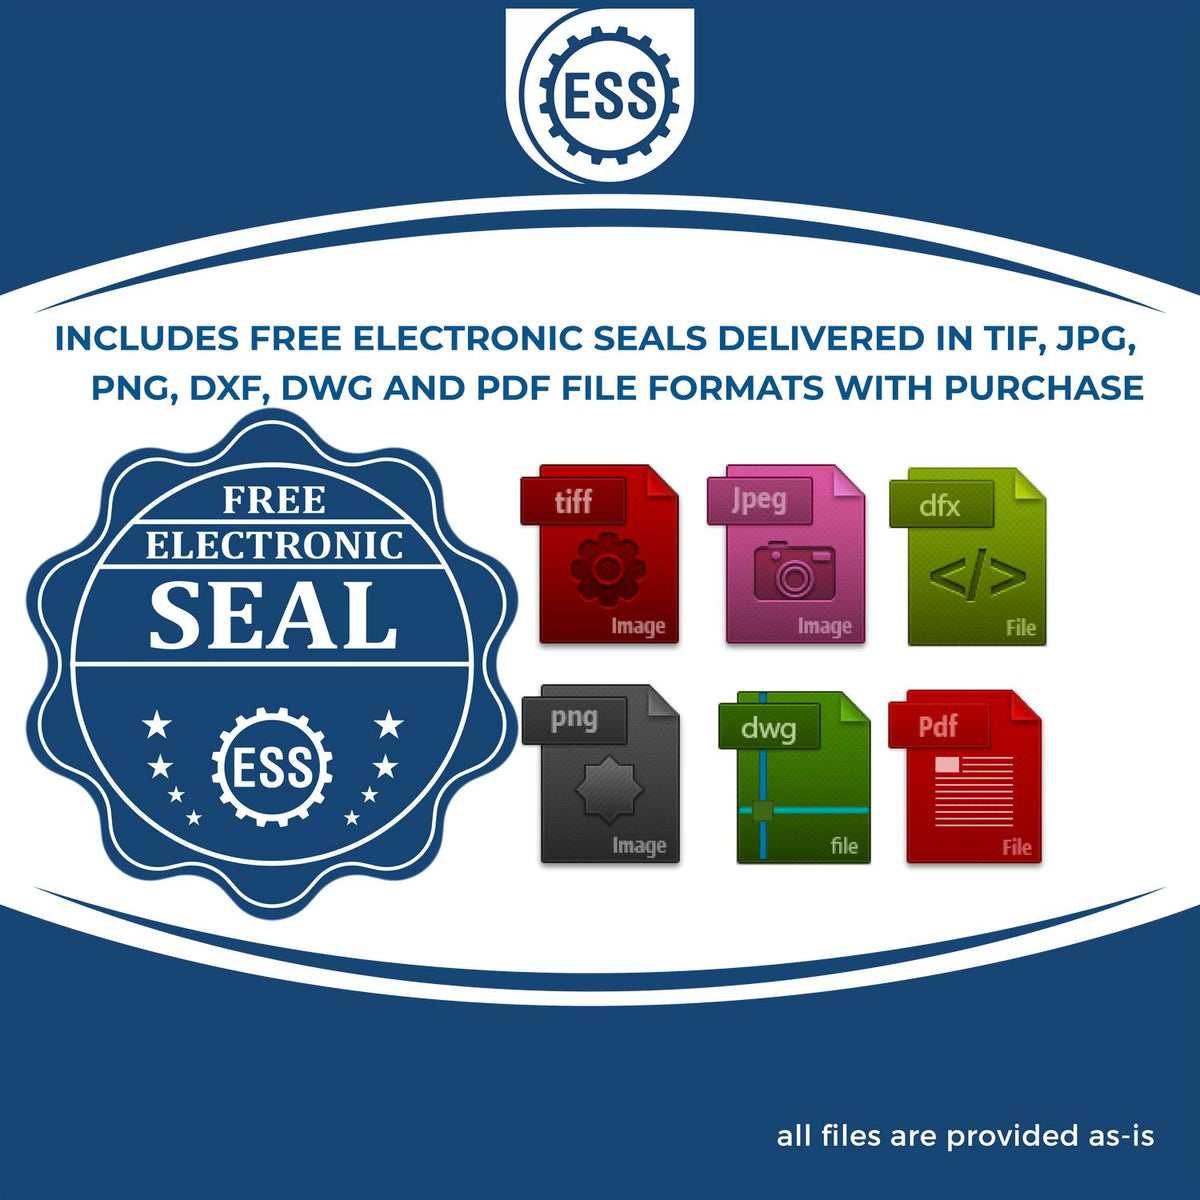 An infographic for the free electronic seal for the State of Wisconsin Extended Long Reach Geologist Seal illustrating the different file type icons such as DXF, DWG, TIF, JPG and PNG.